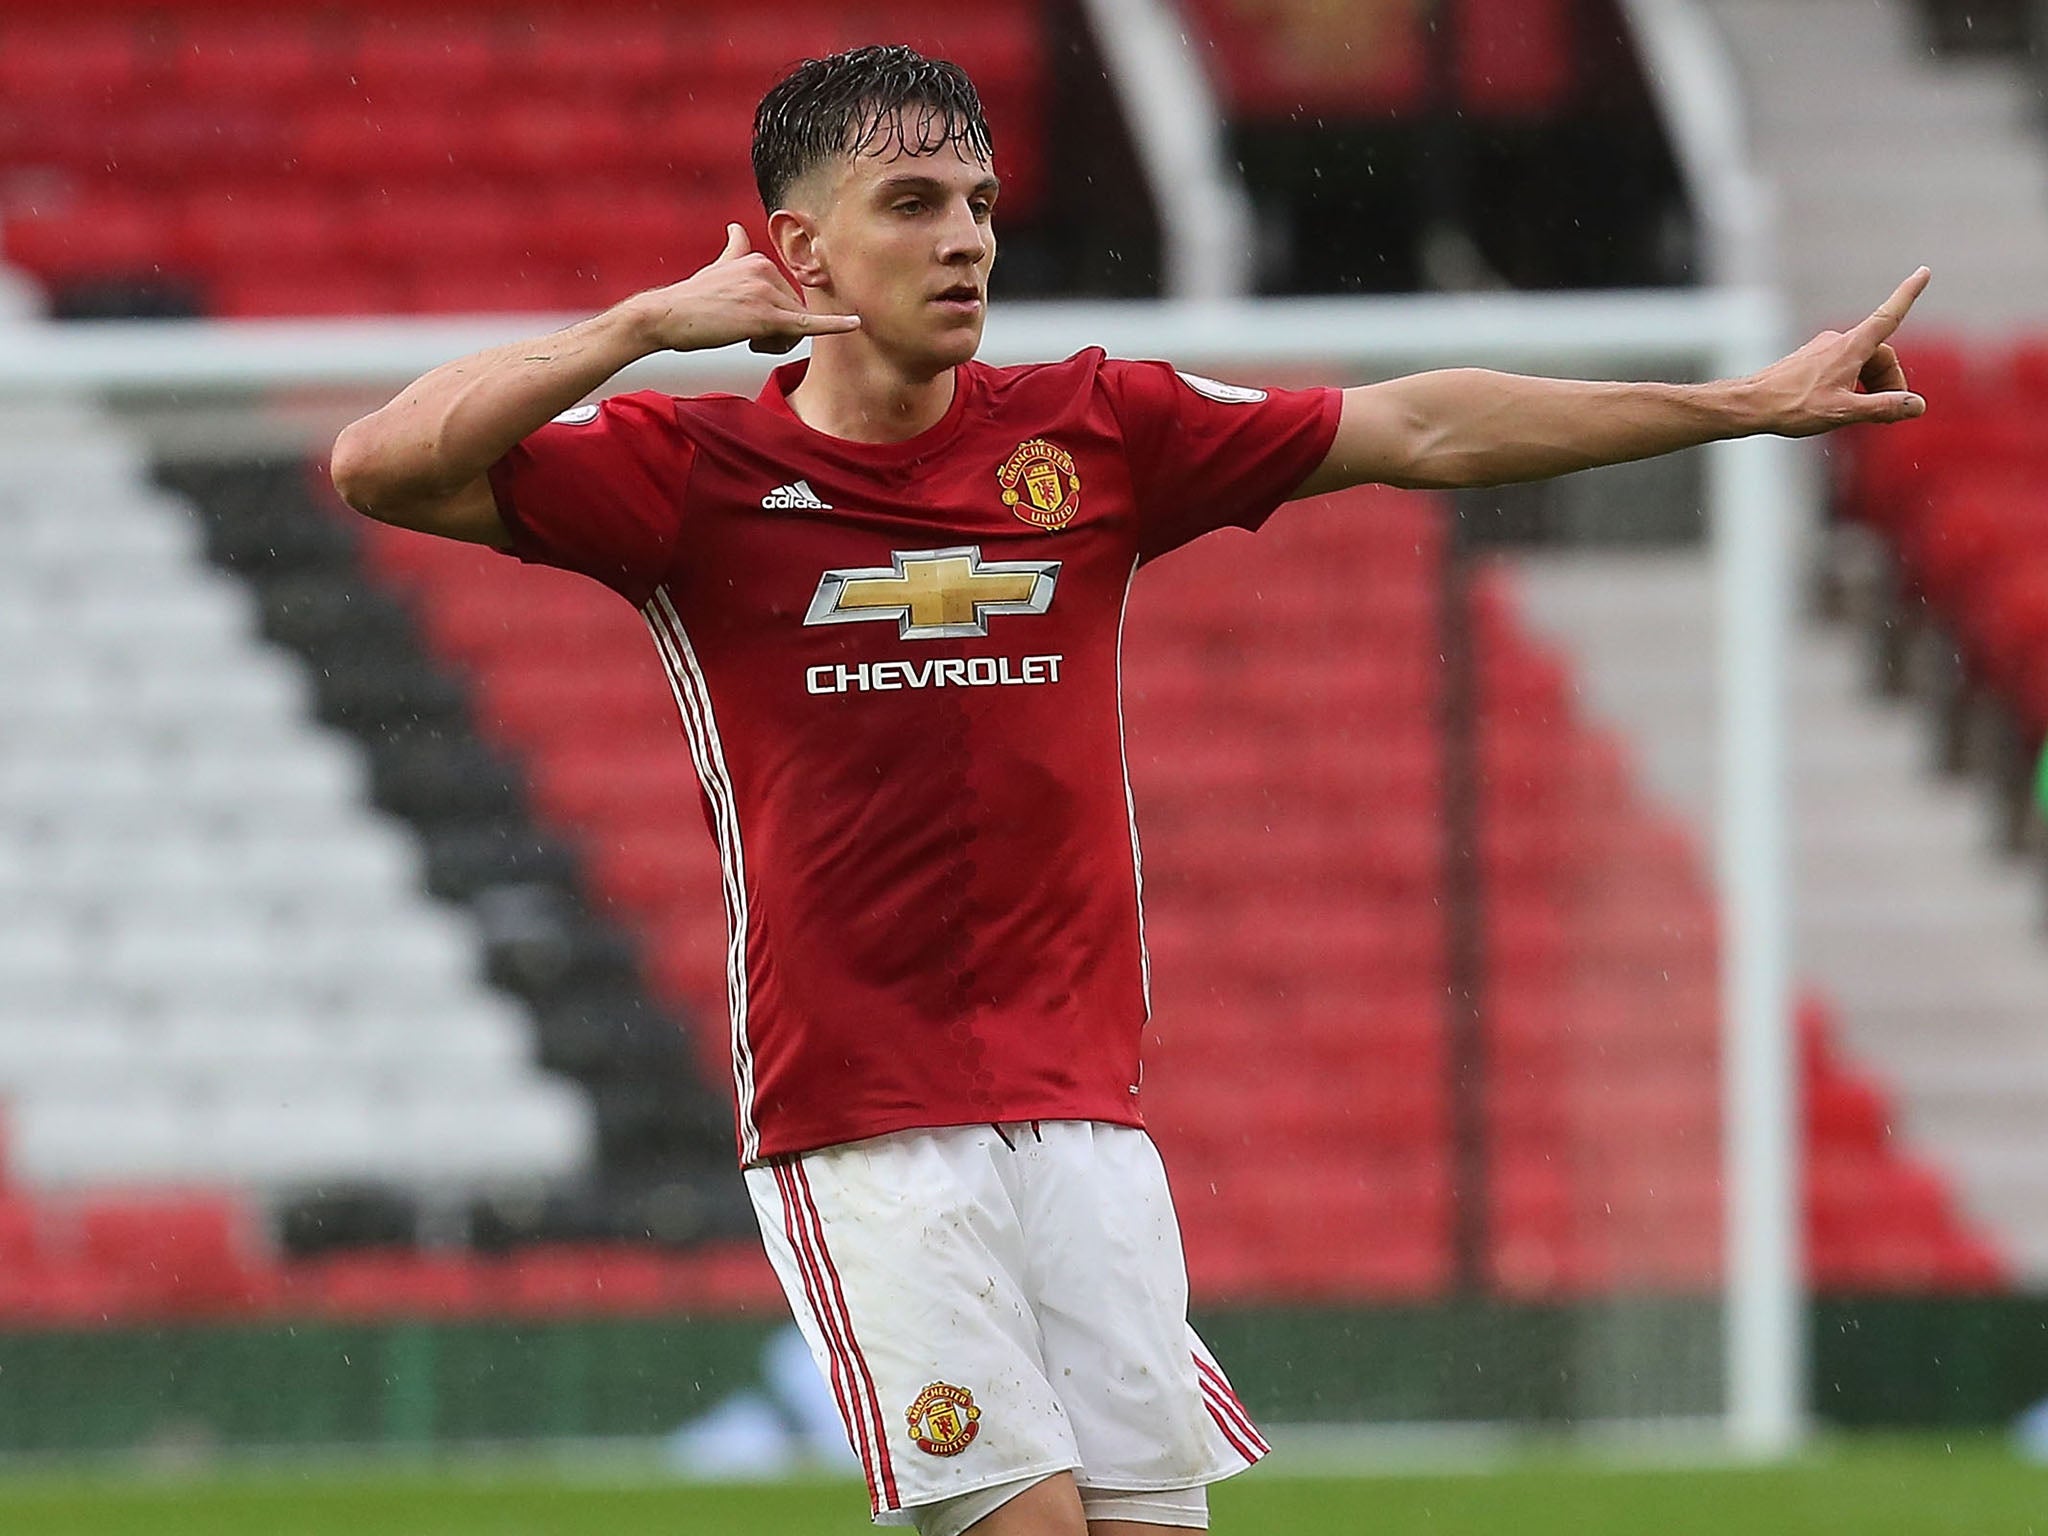 Josh Harrop scored a hat-trick on Monday for the under-23s